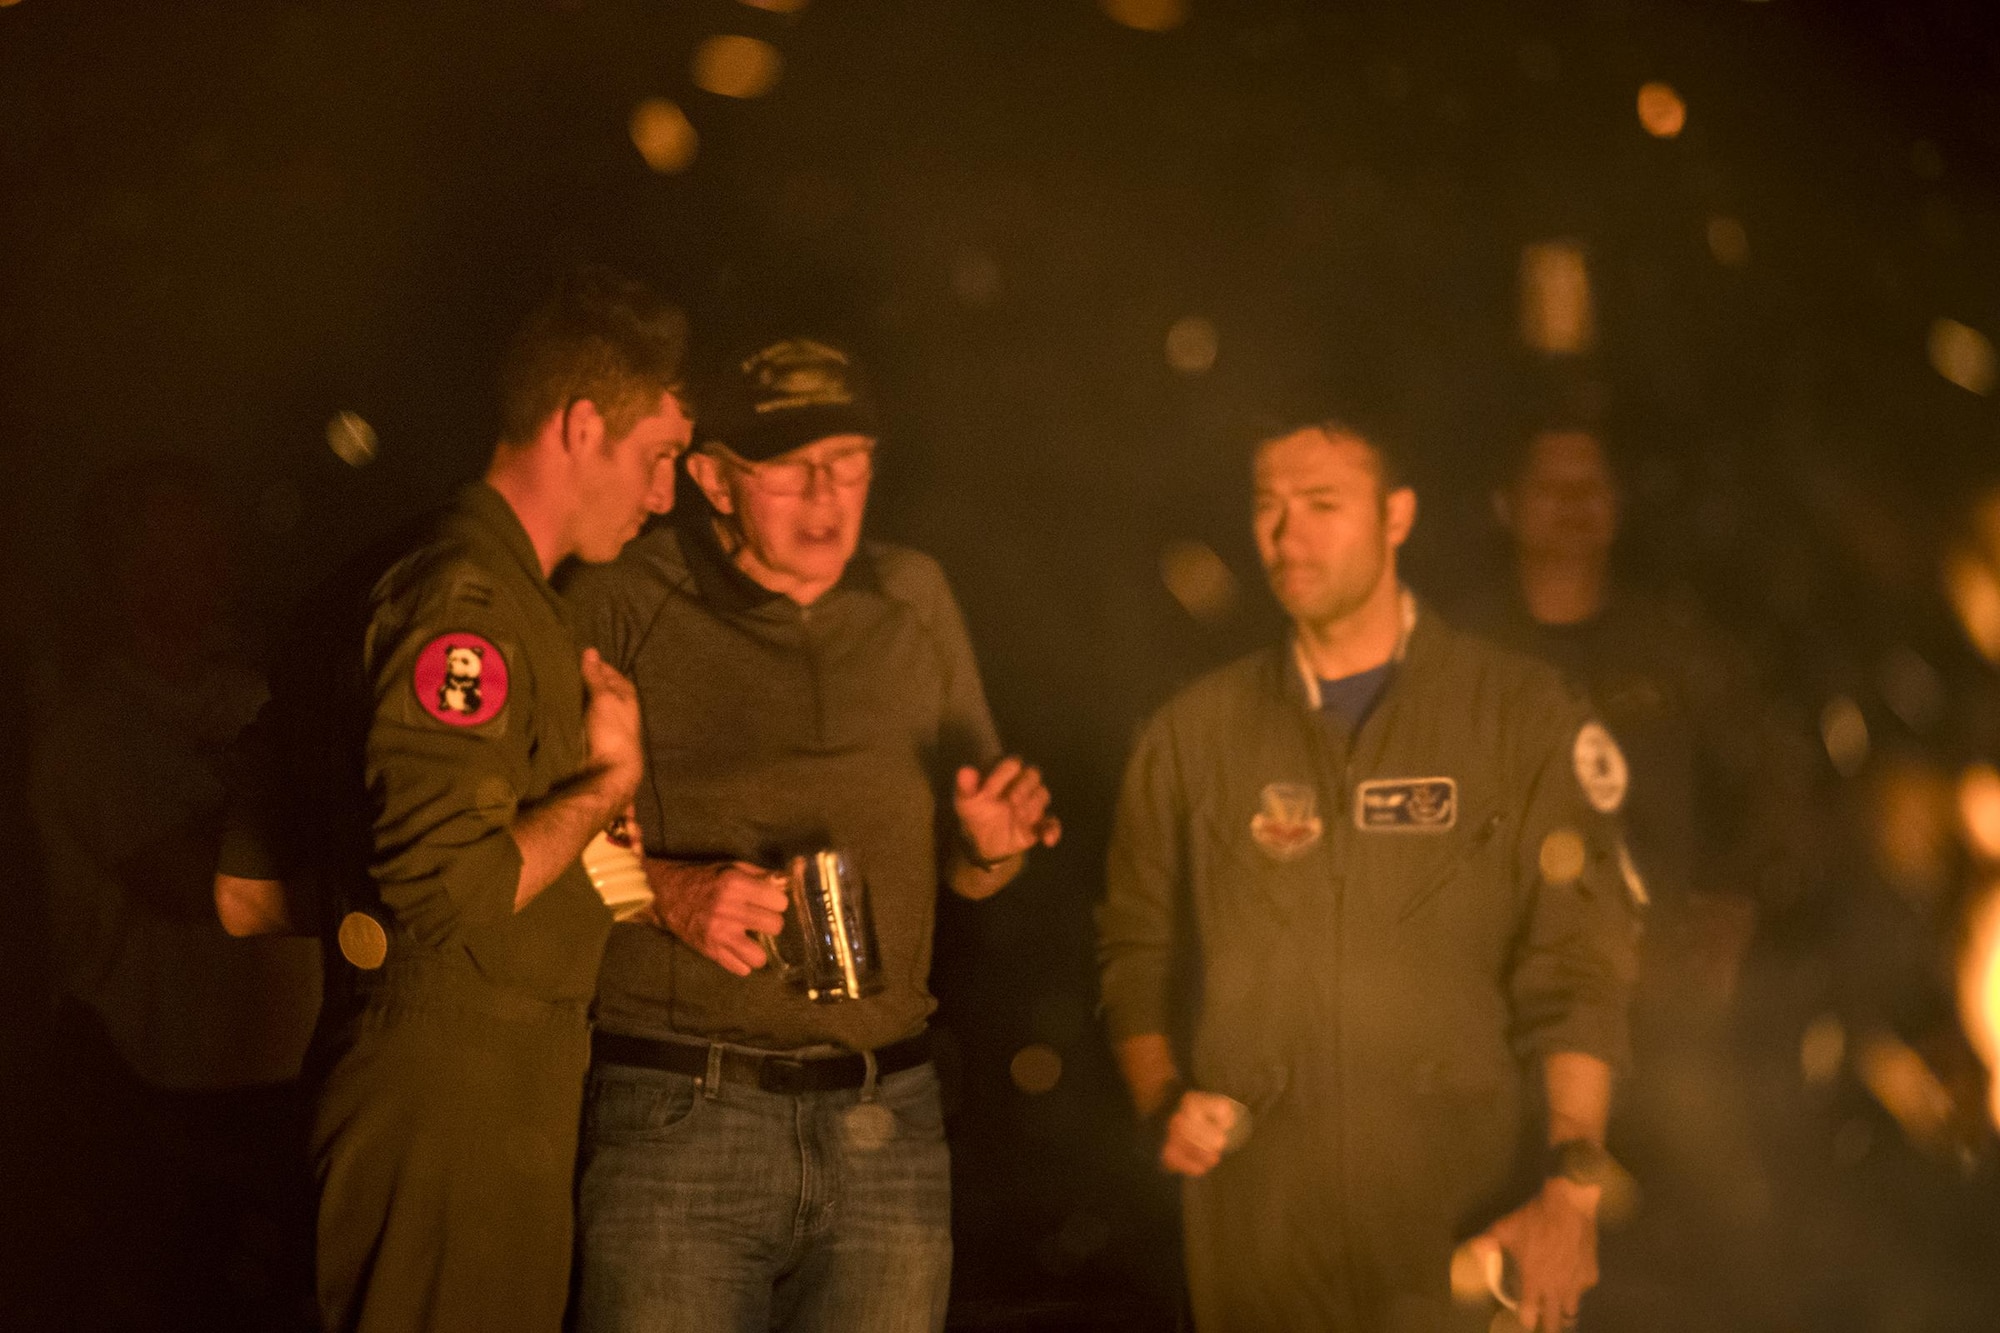 A-10C Thunderbolt II pilots from the 23d Fighter Group speak with a former member of the Flying Tigers at a piano burn during the 75th Anniversary Flying Tiger Reunion, March 10, 2017, at Moody Air Force Base, Ga. In 1941, President Roosevelt signed an executive order forming the American Volunteer Group. The AVG was organized into the 1st, 2nd, and 3rd Pursuit Squadrons and later disbanded and replaced by the 23d Fighter Group in 1942. Under the command of Gen. Claire Chennault, the Flying Tigers comprised of the 74th, 75th, and 76th Pursuit Squadrons defended China against the Japanese. Throughout World War II, the Flying Tigers achieved combat success and flew the US-made Curtiss P-40 Warhawks painted with the shark-mouth design. (U.S. Air Force photo by Staff Sgt. Ryan Callaghan)